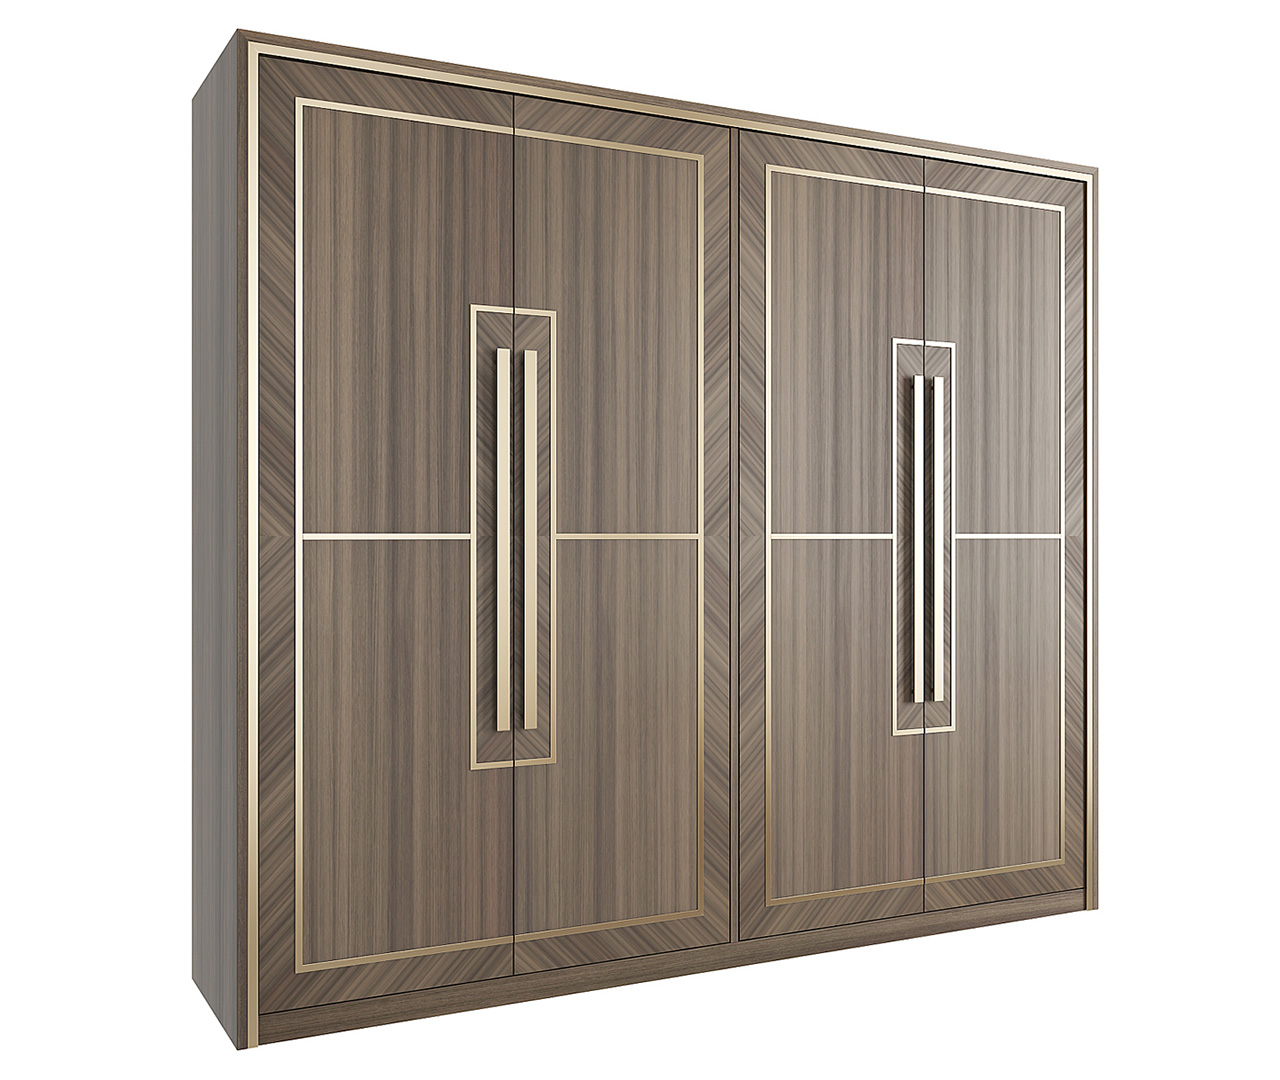 Classic Stainless Steel and Wood Wardrobe